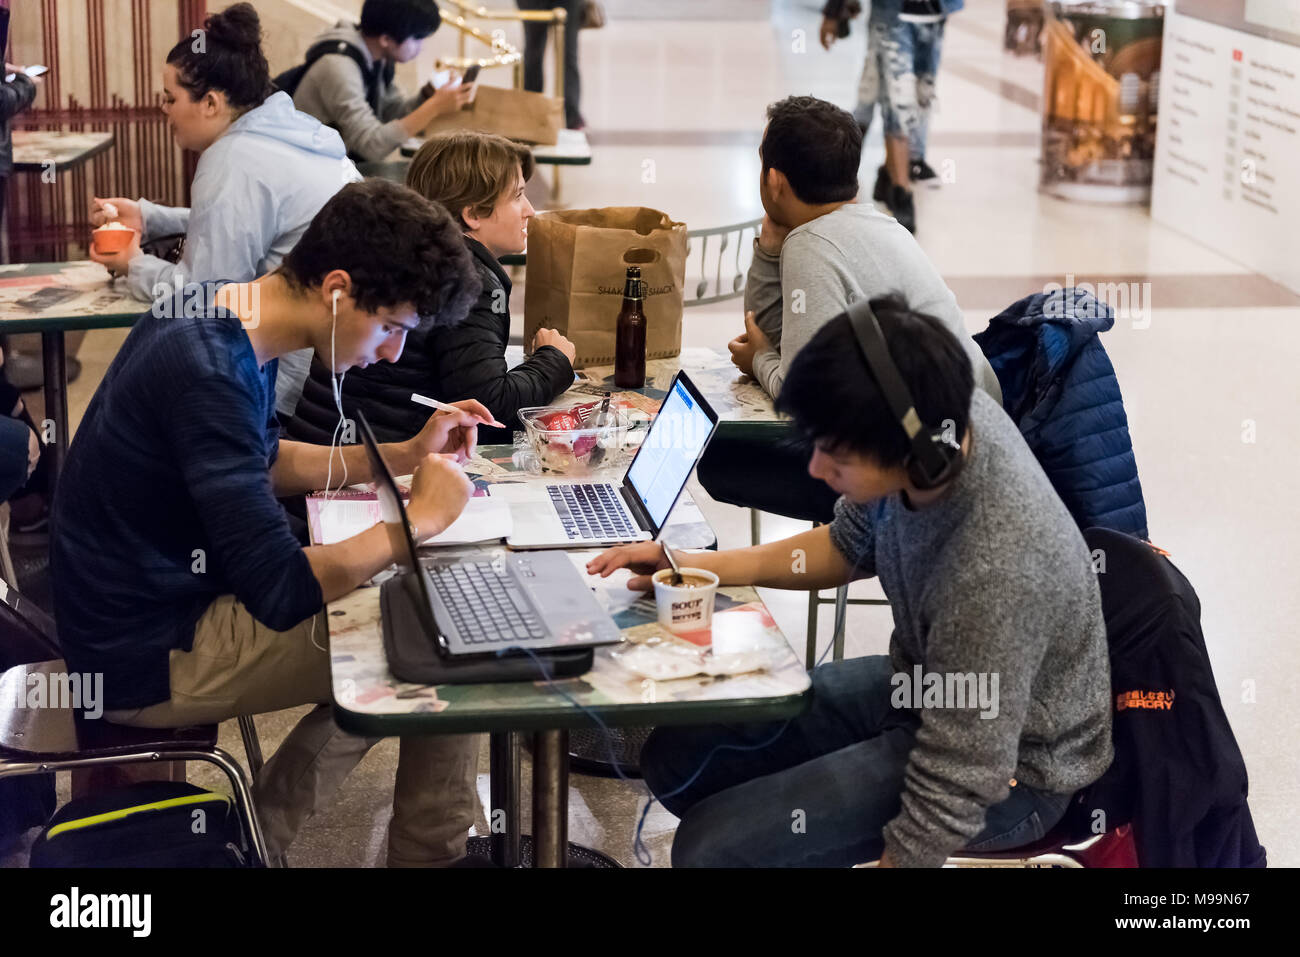 New York, USA - October 29, 2017: Grand central terminal food court restaurant in New York City with people sitting at tables in store shop eating, di Stock Photo